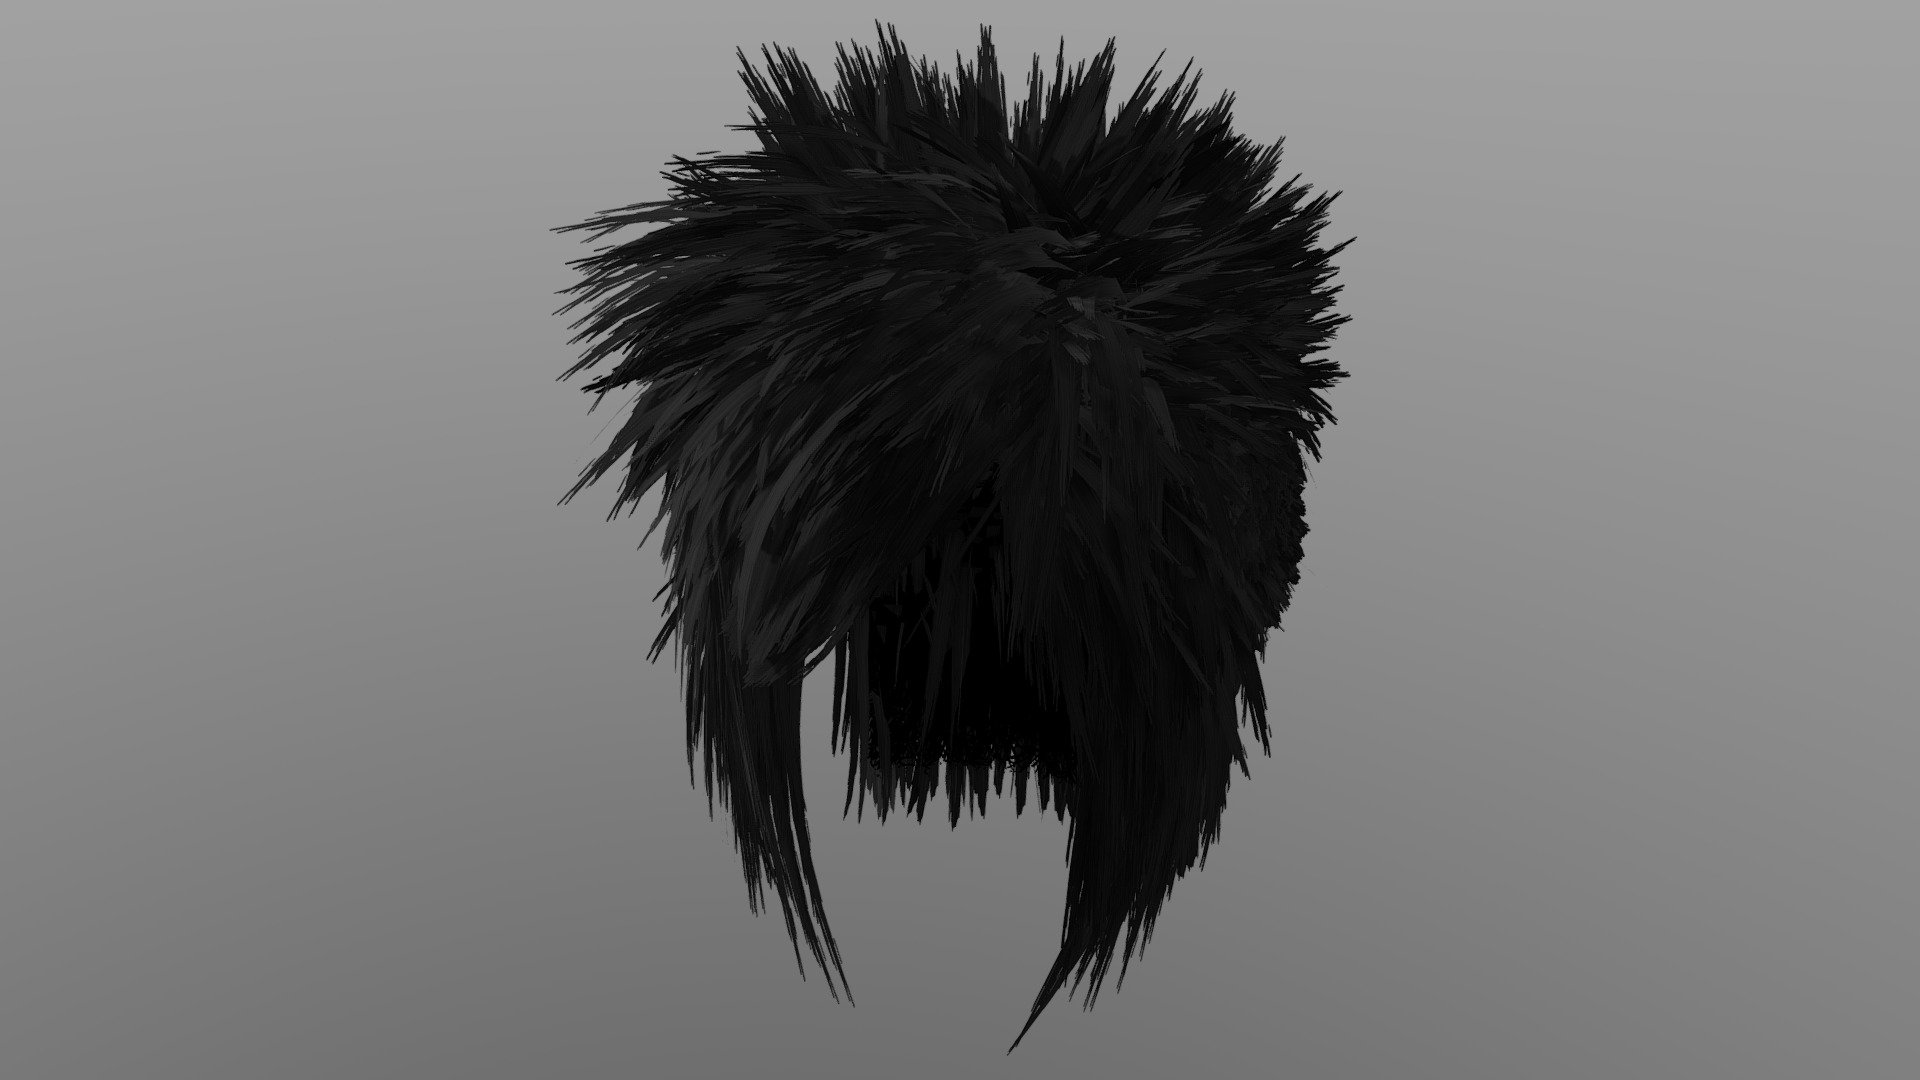 Wild Mullet Hair (Ebony)
Bring your 3D model of a mullet hairstyle to life with this high-poly design. Perfect for use in games, animations, VR, AR, and more, this model is optimized for performance and still retains a high level of detail.


Features



High poly design with 83,683 vertices

105,047 edges

32,411 faces (polygons)

64,822 tris

2k PBR Textures and materials

File formats included: .obj, .fbx, .dae


Tools Used
This Wild Mullet hairstyle 3D model was created using Blender 3.3.1, a popular and versatile 3D creation software.


Availability
This high-poly Wild Mullet hairstyle 3D model is ready for use and available for purchase. Bring your project to the next level with this high-quality and optimized model 3d model